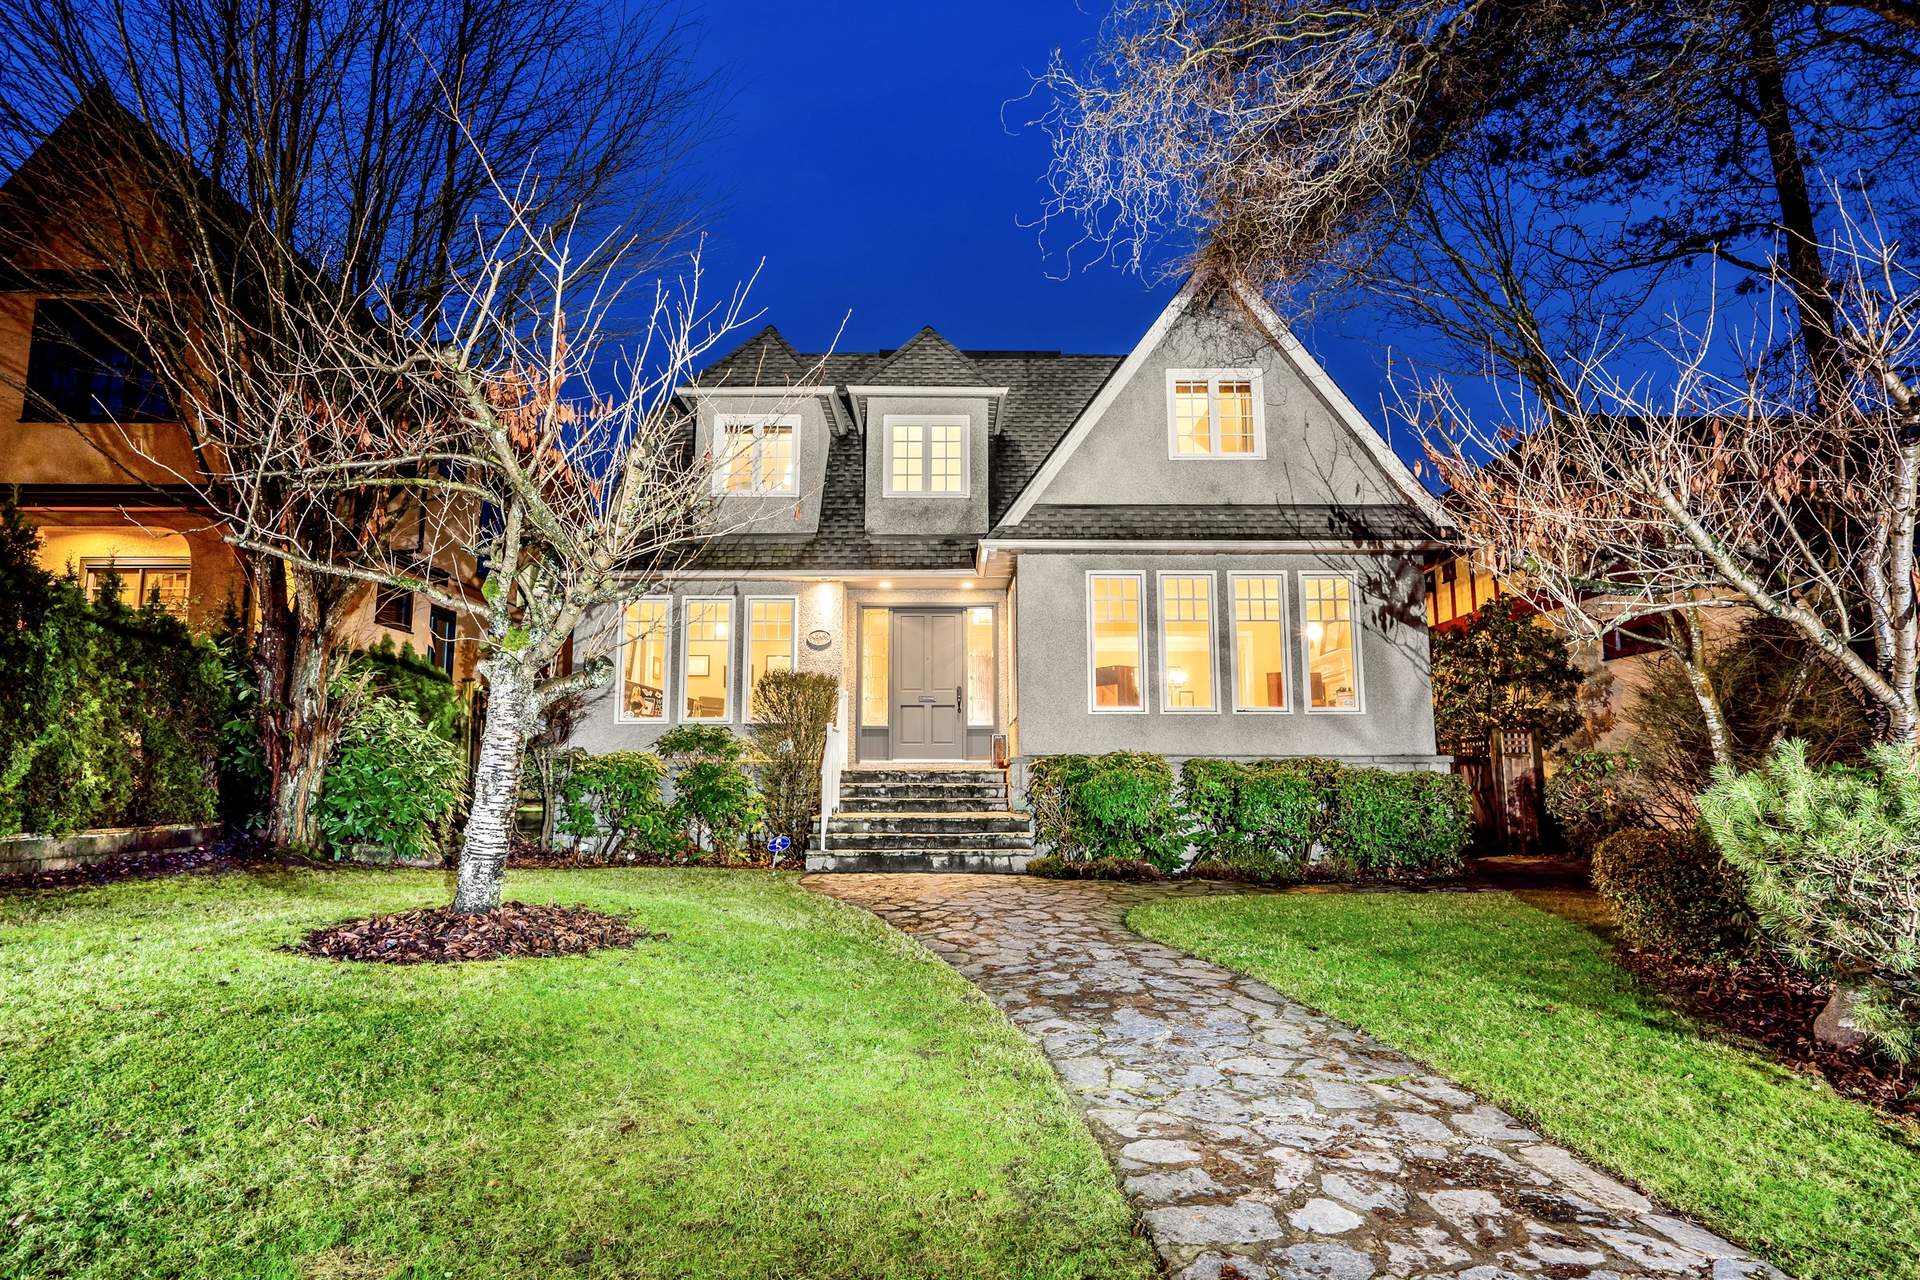  A Gorgeous Shaughnessy Family Residence!